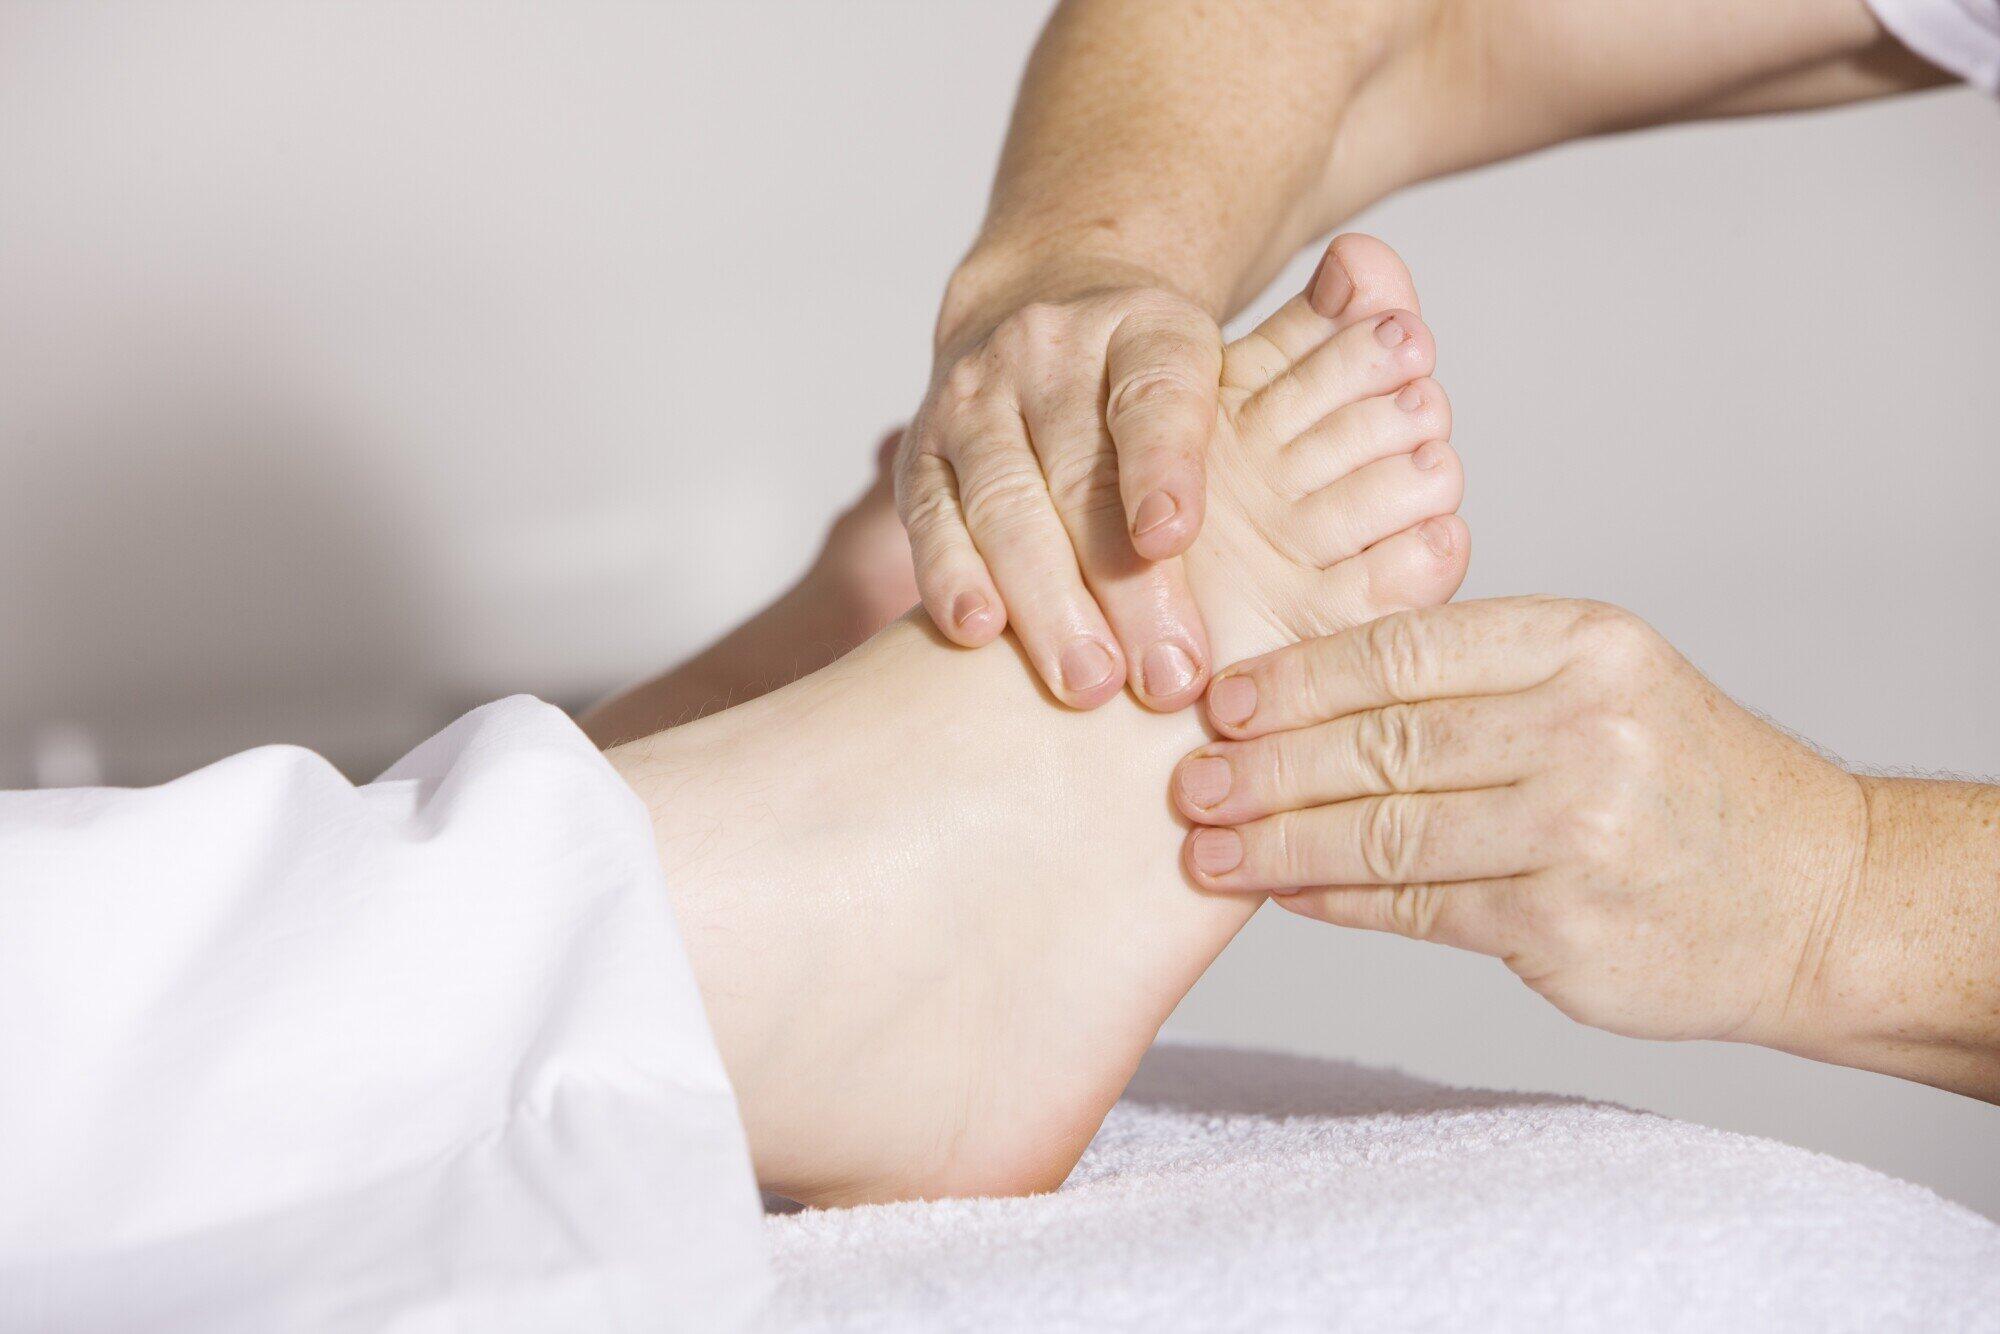 The Connection Between Foot Pain and Your Overall Health